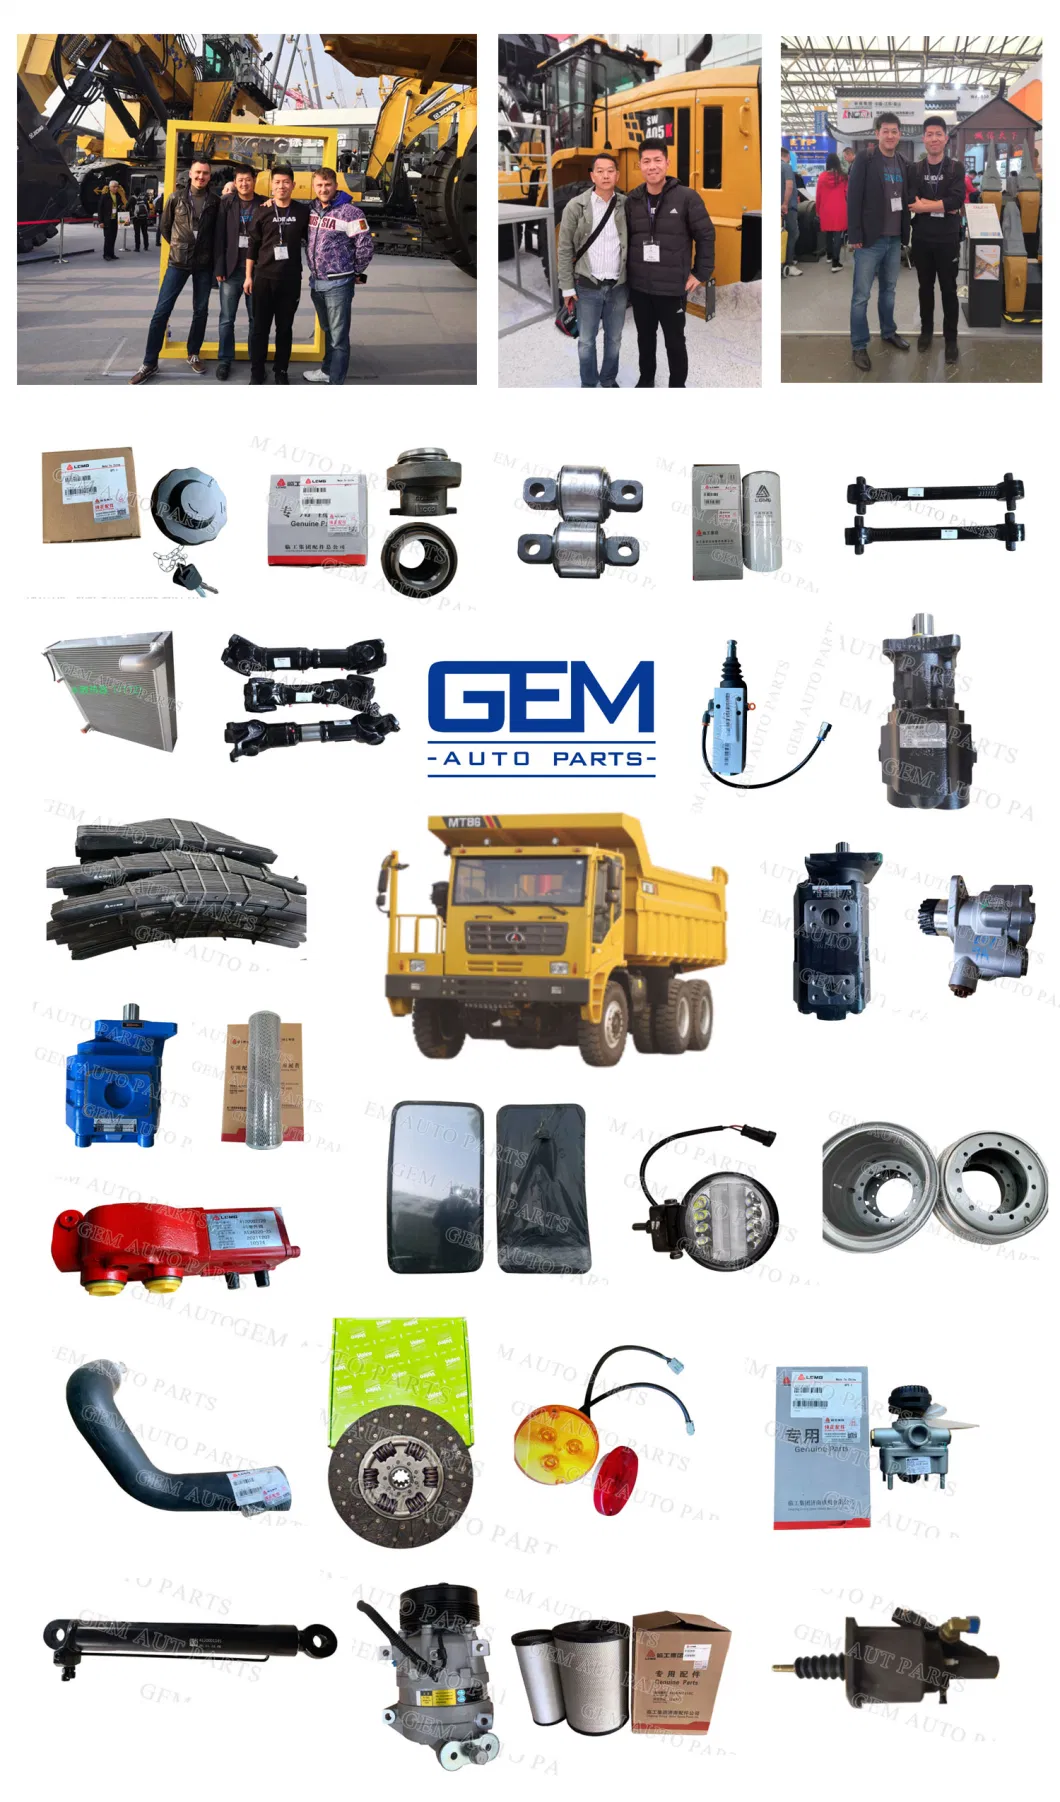 Weichai Engine Wd12g420e for Sdlg XCMG Xgma Liugong Shantui Doosan Excavator Loader Construction Mechinery Truck Spare Parts